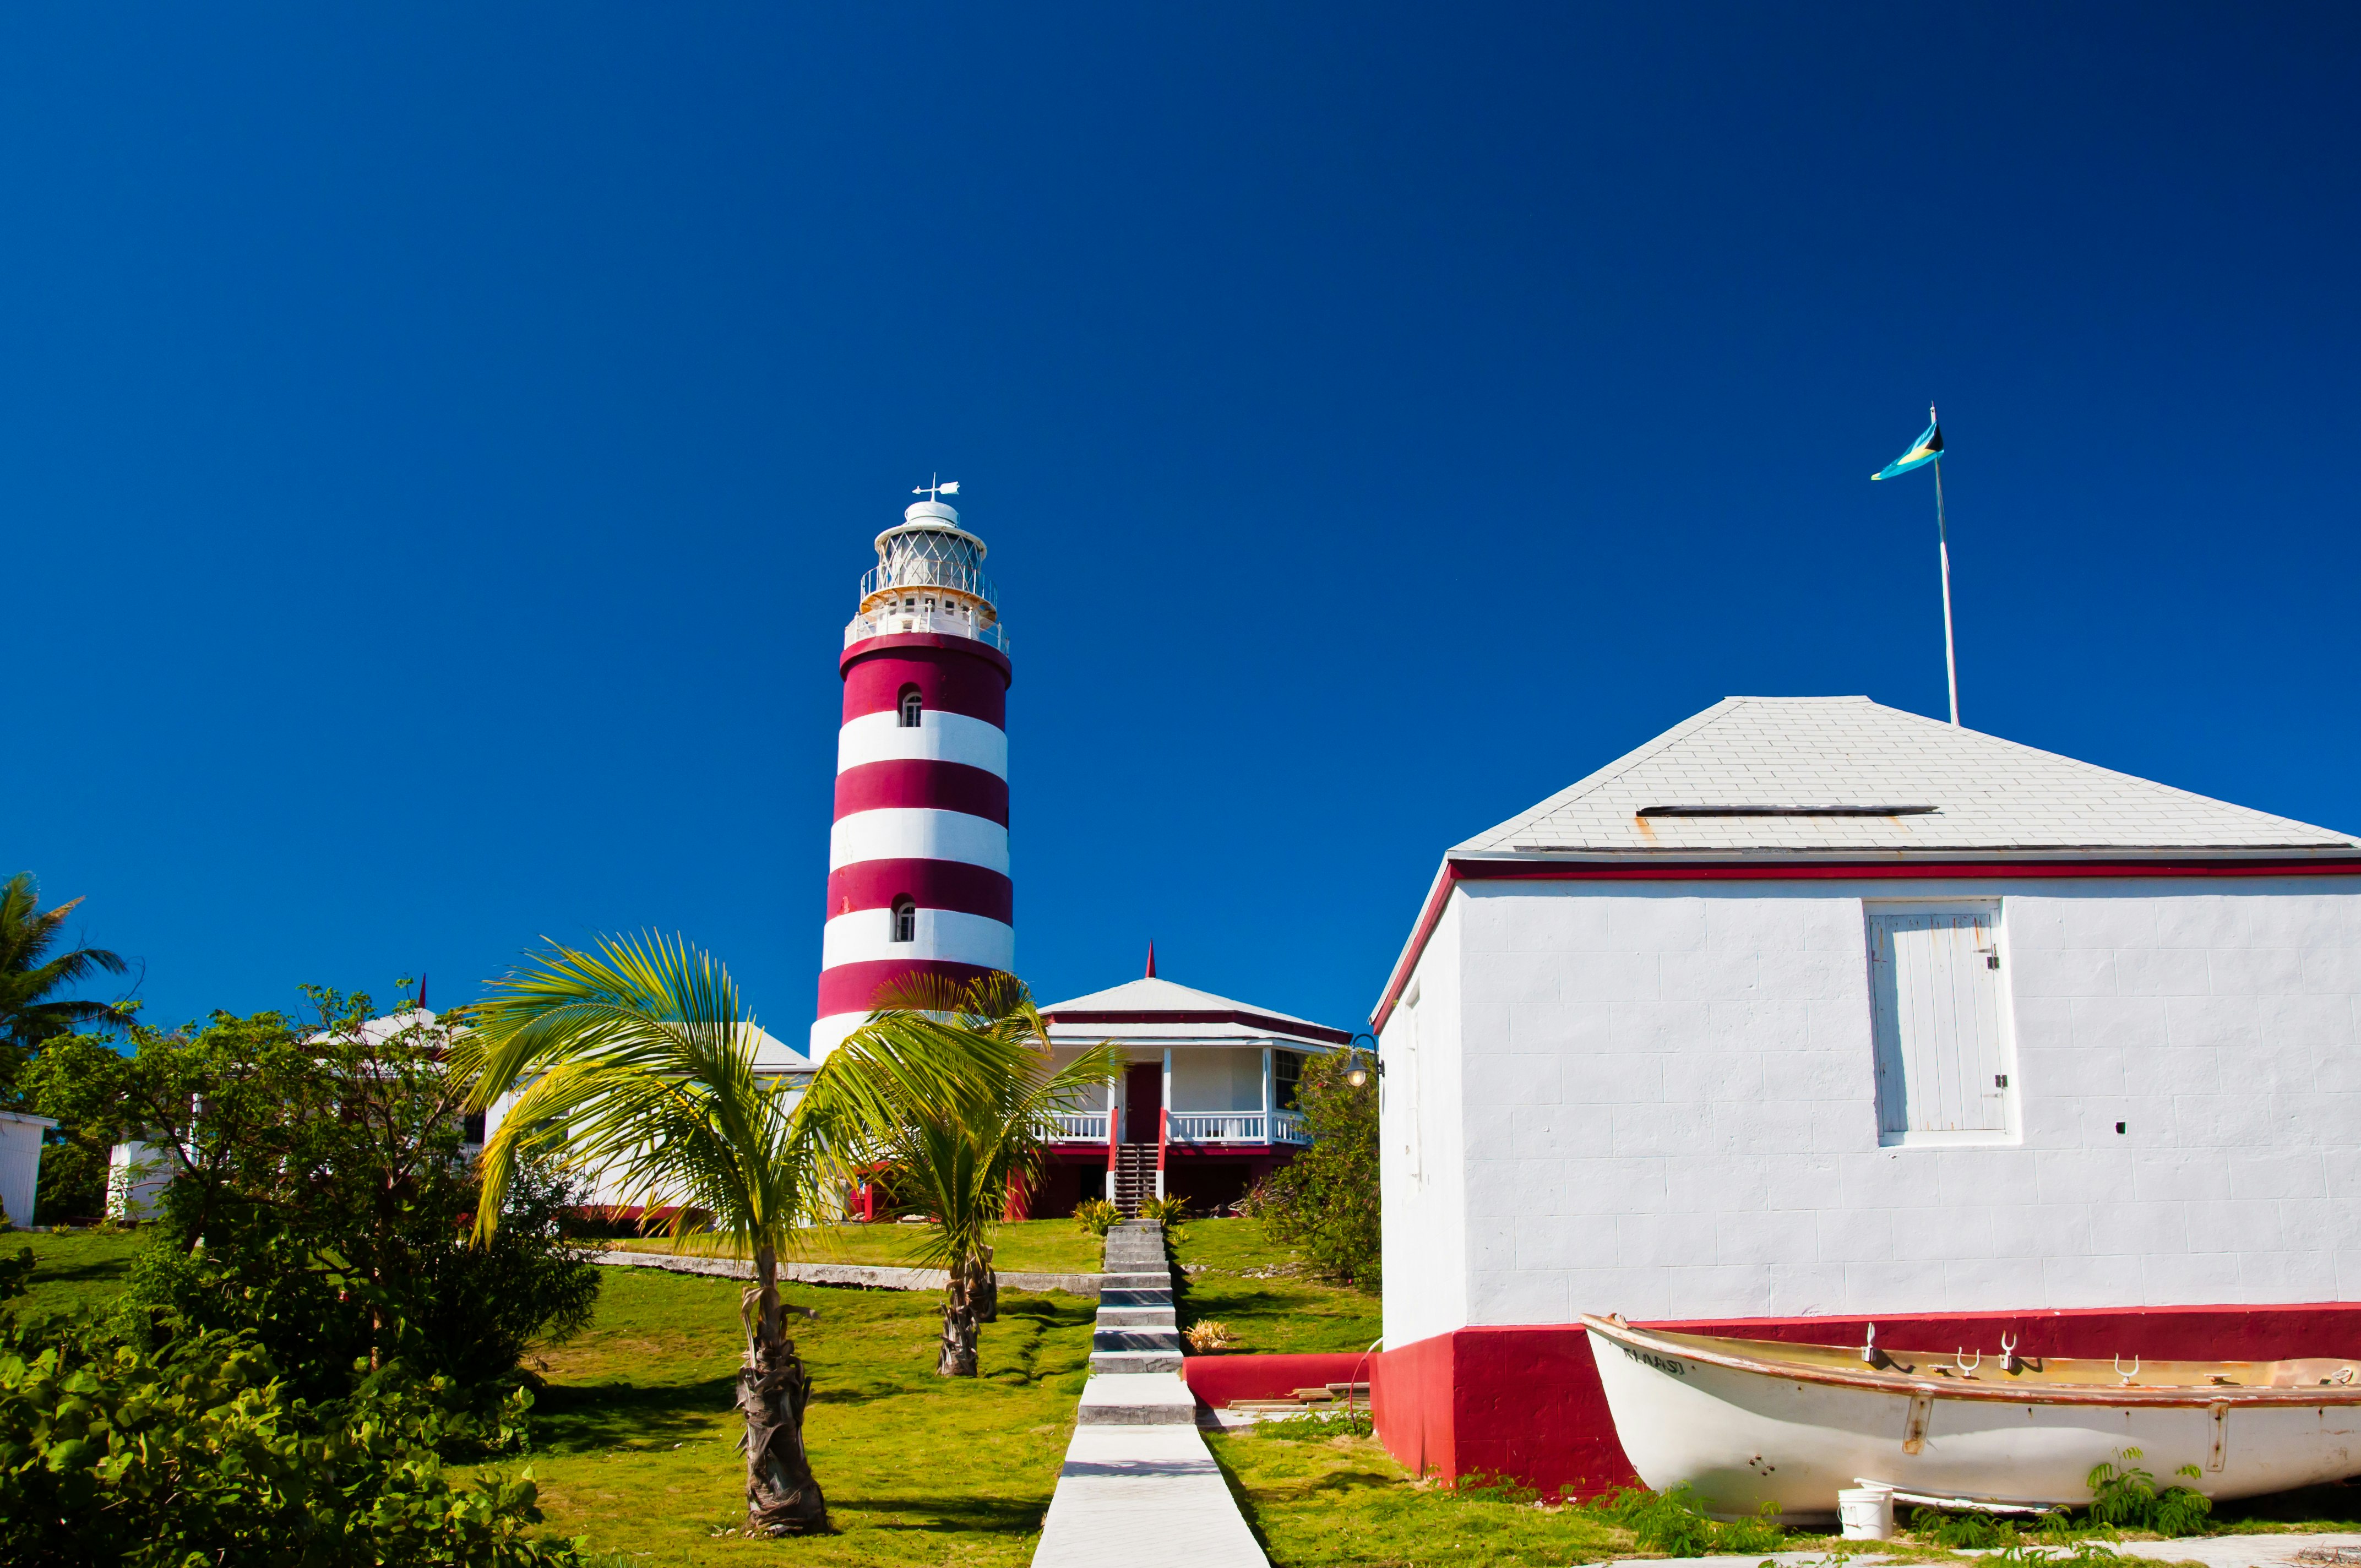 A paved path leads to a red and white house and candy cane stripped lighthouse on Elbow Cay in the Bahamas. Storage shed with small boat are in the foreground.